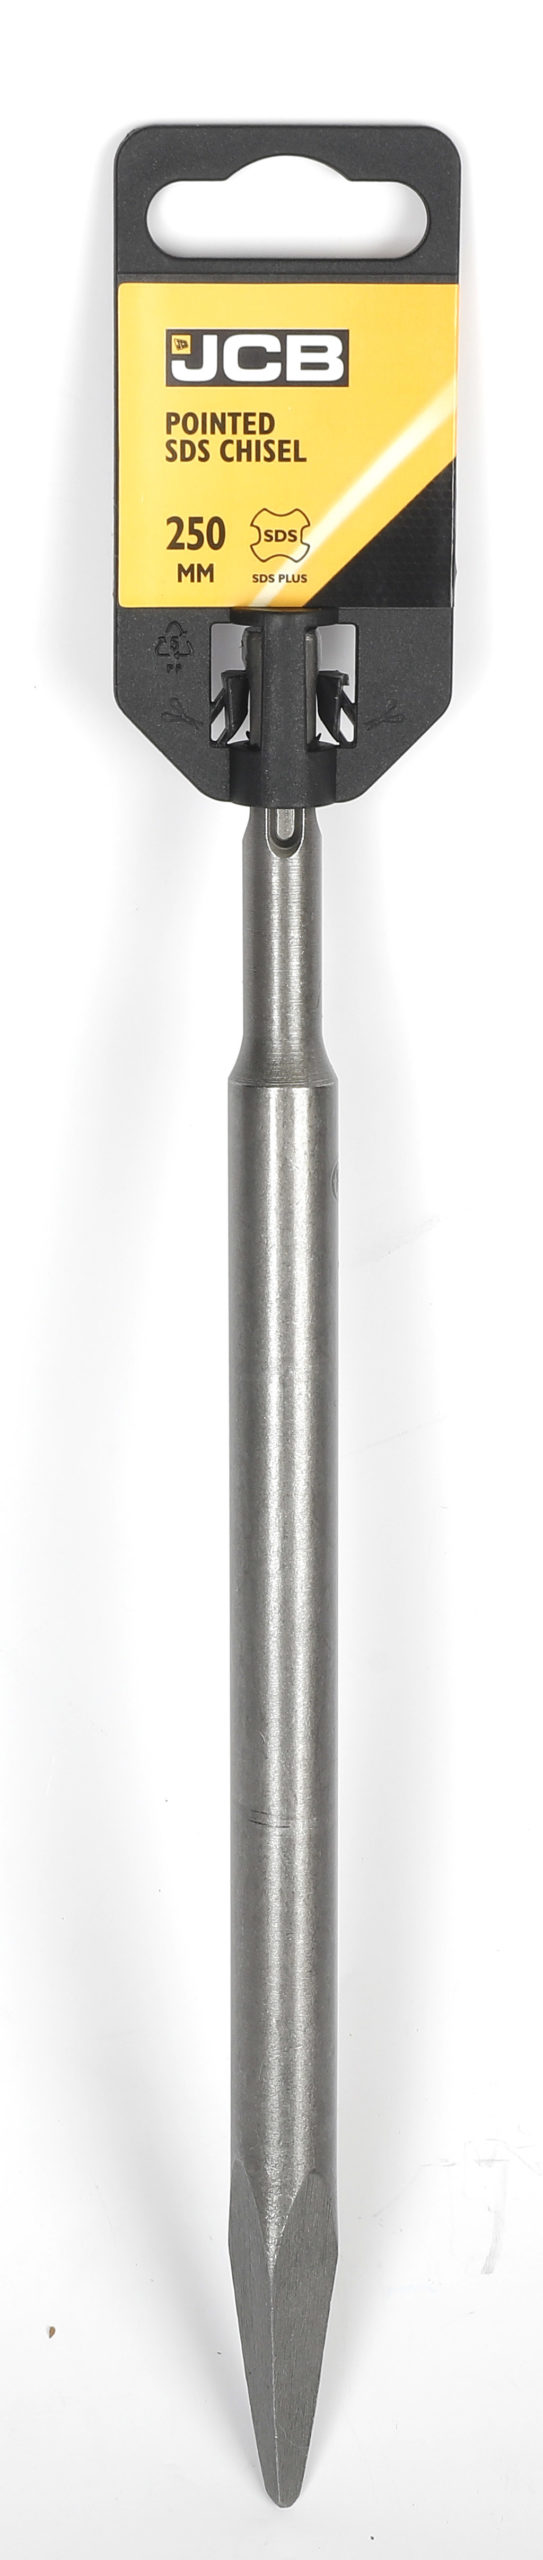 5055803335212 SDS PLUS POINTED CHISEL scaled 1